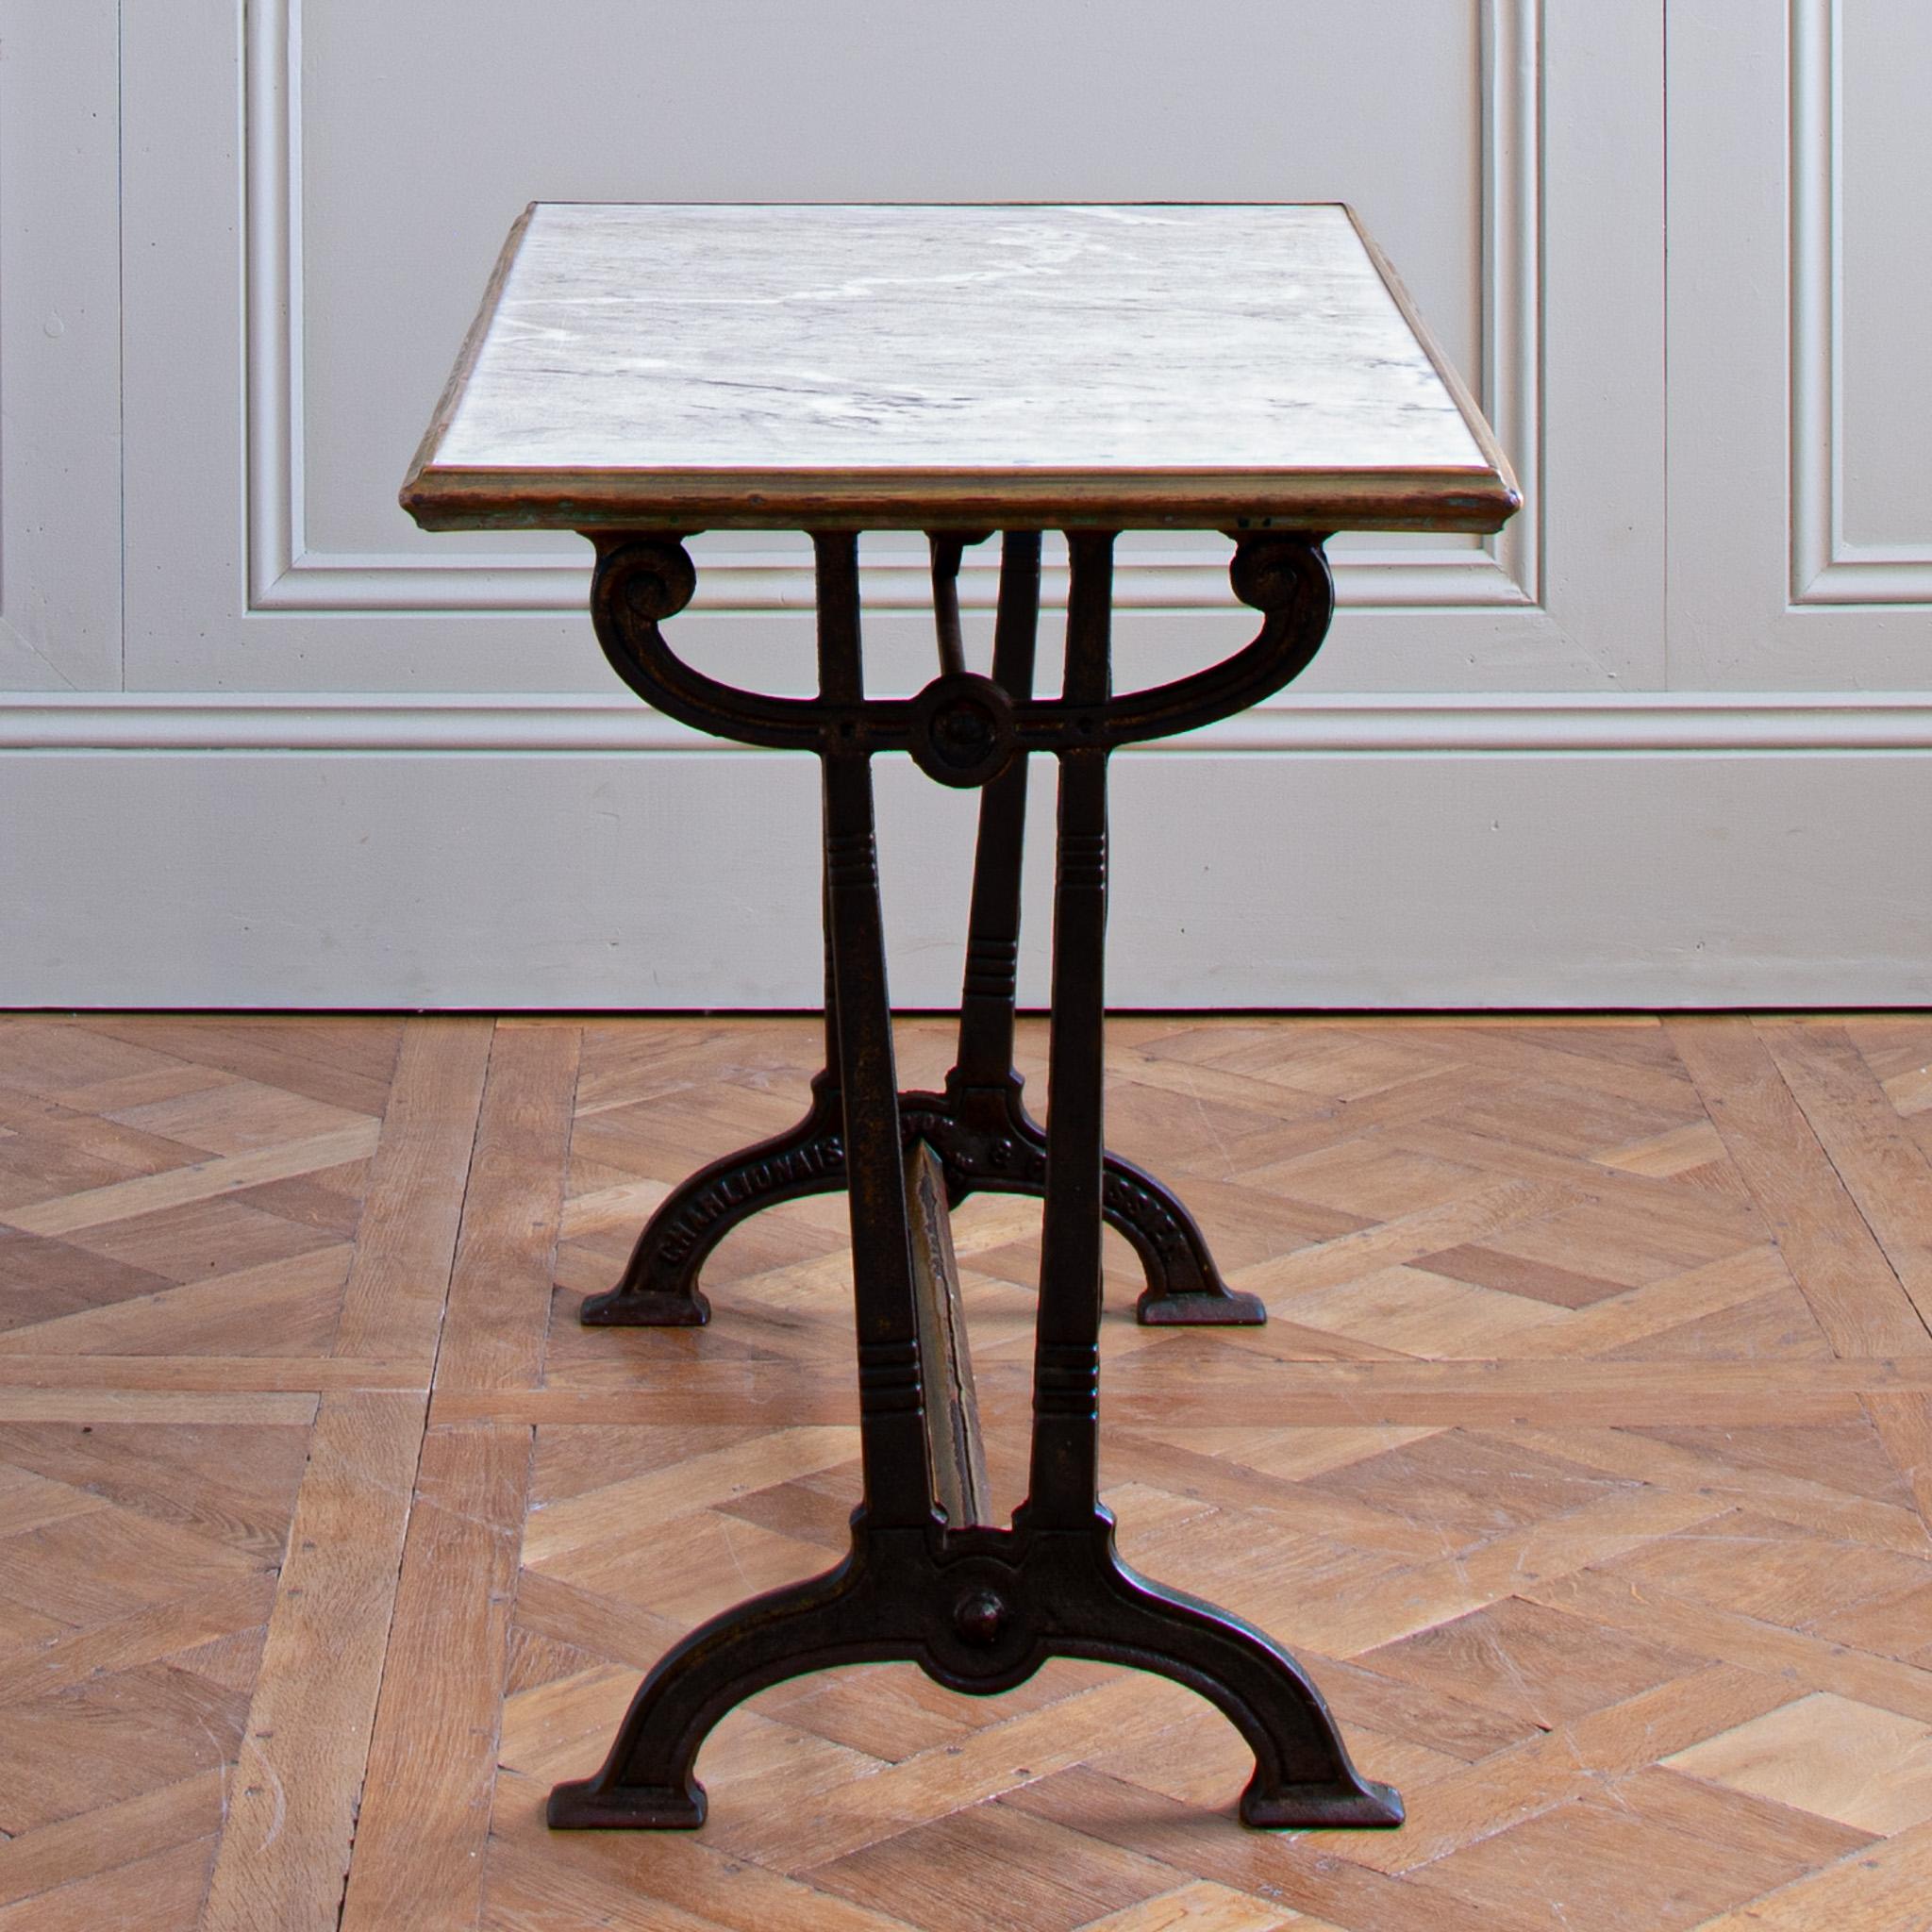 20th Century Art nouveau French Bistro Table Circa 1900 by Charlionais & Panassier